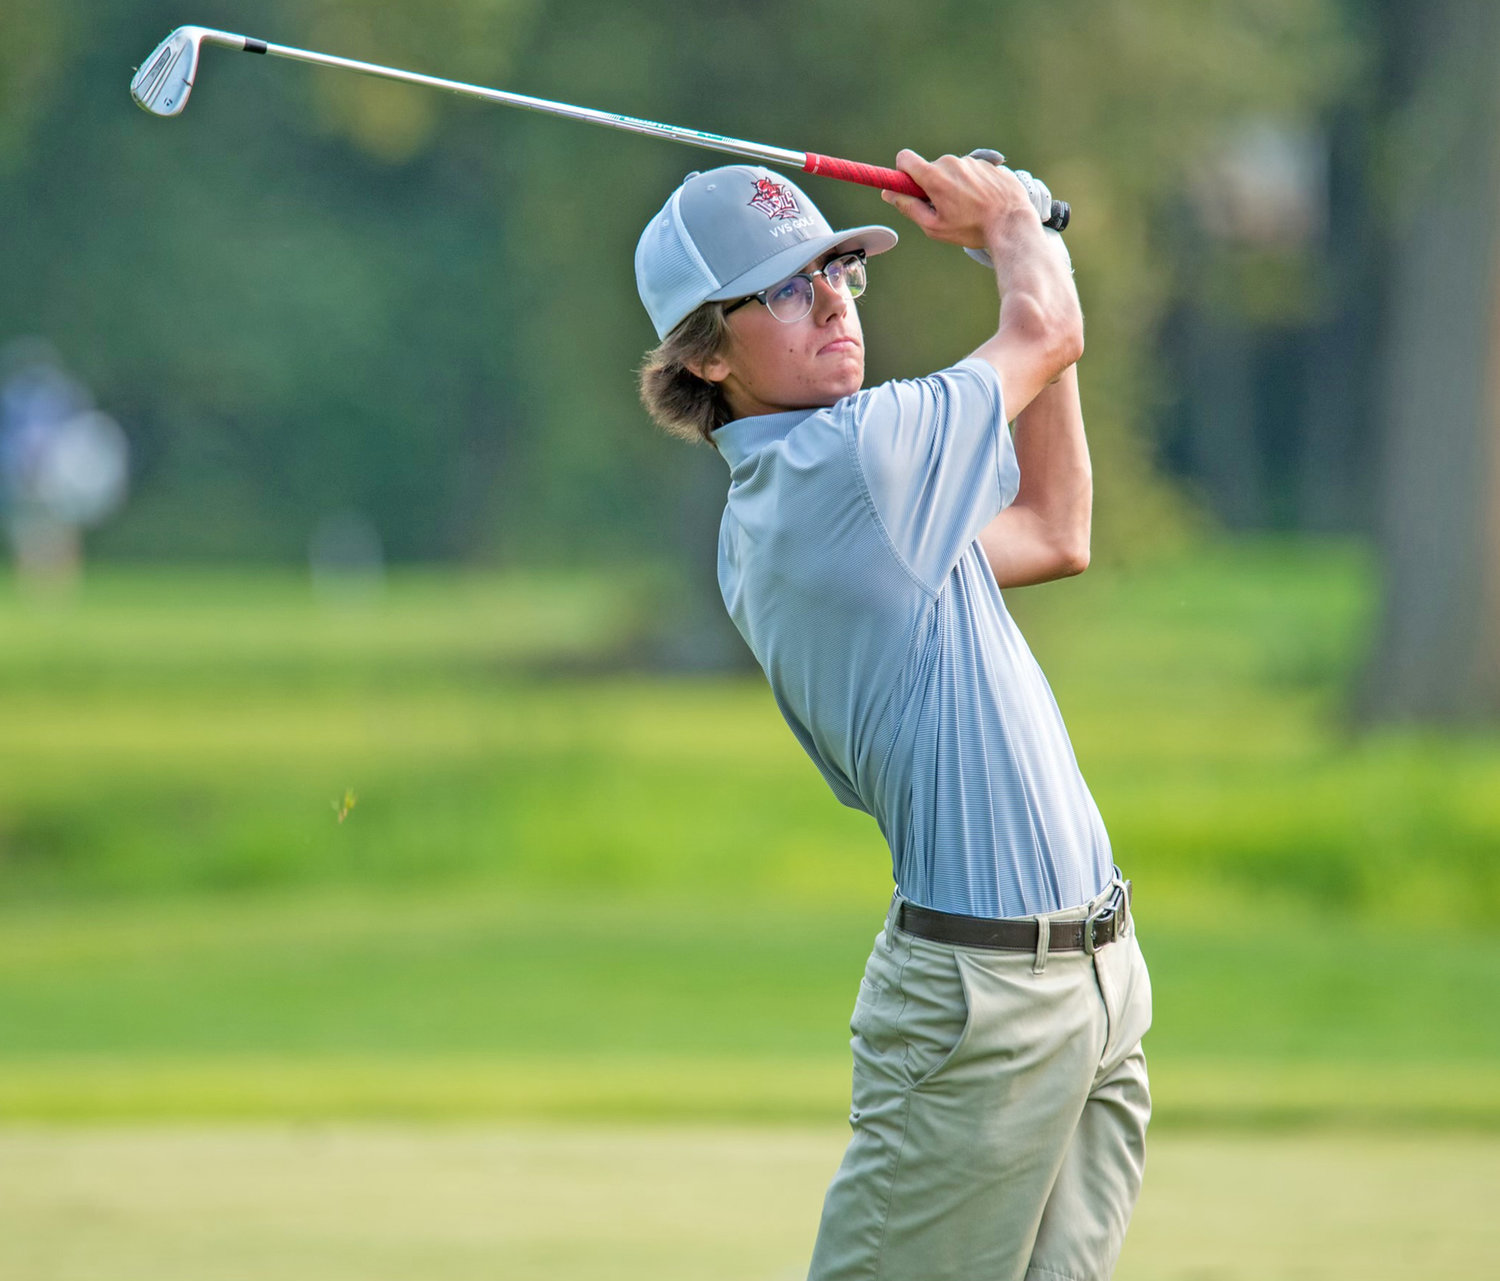 Caleb Decker, a senior at Vernon-Verona-Sherrill, qualified to compete in the state tournament Sunday and Monday at Mark Twain Country Club in Elmira.